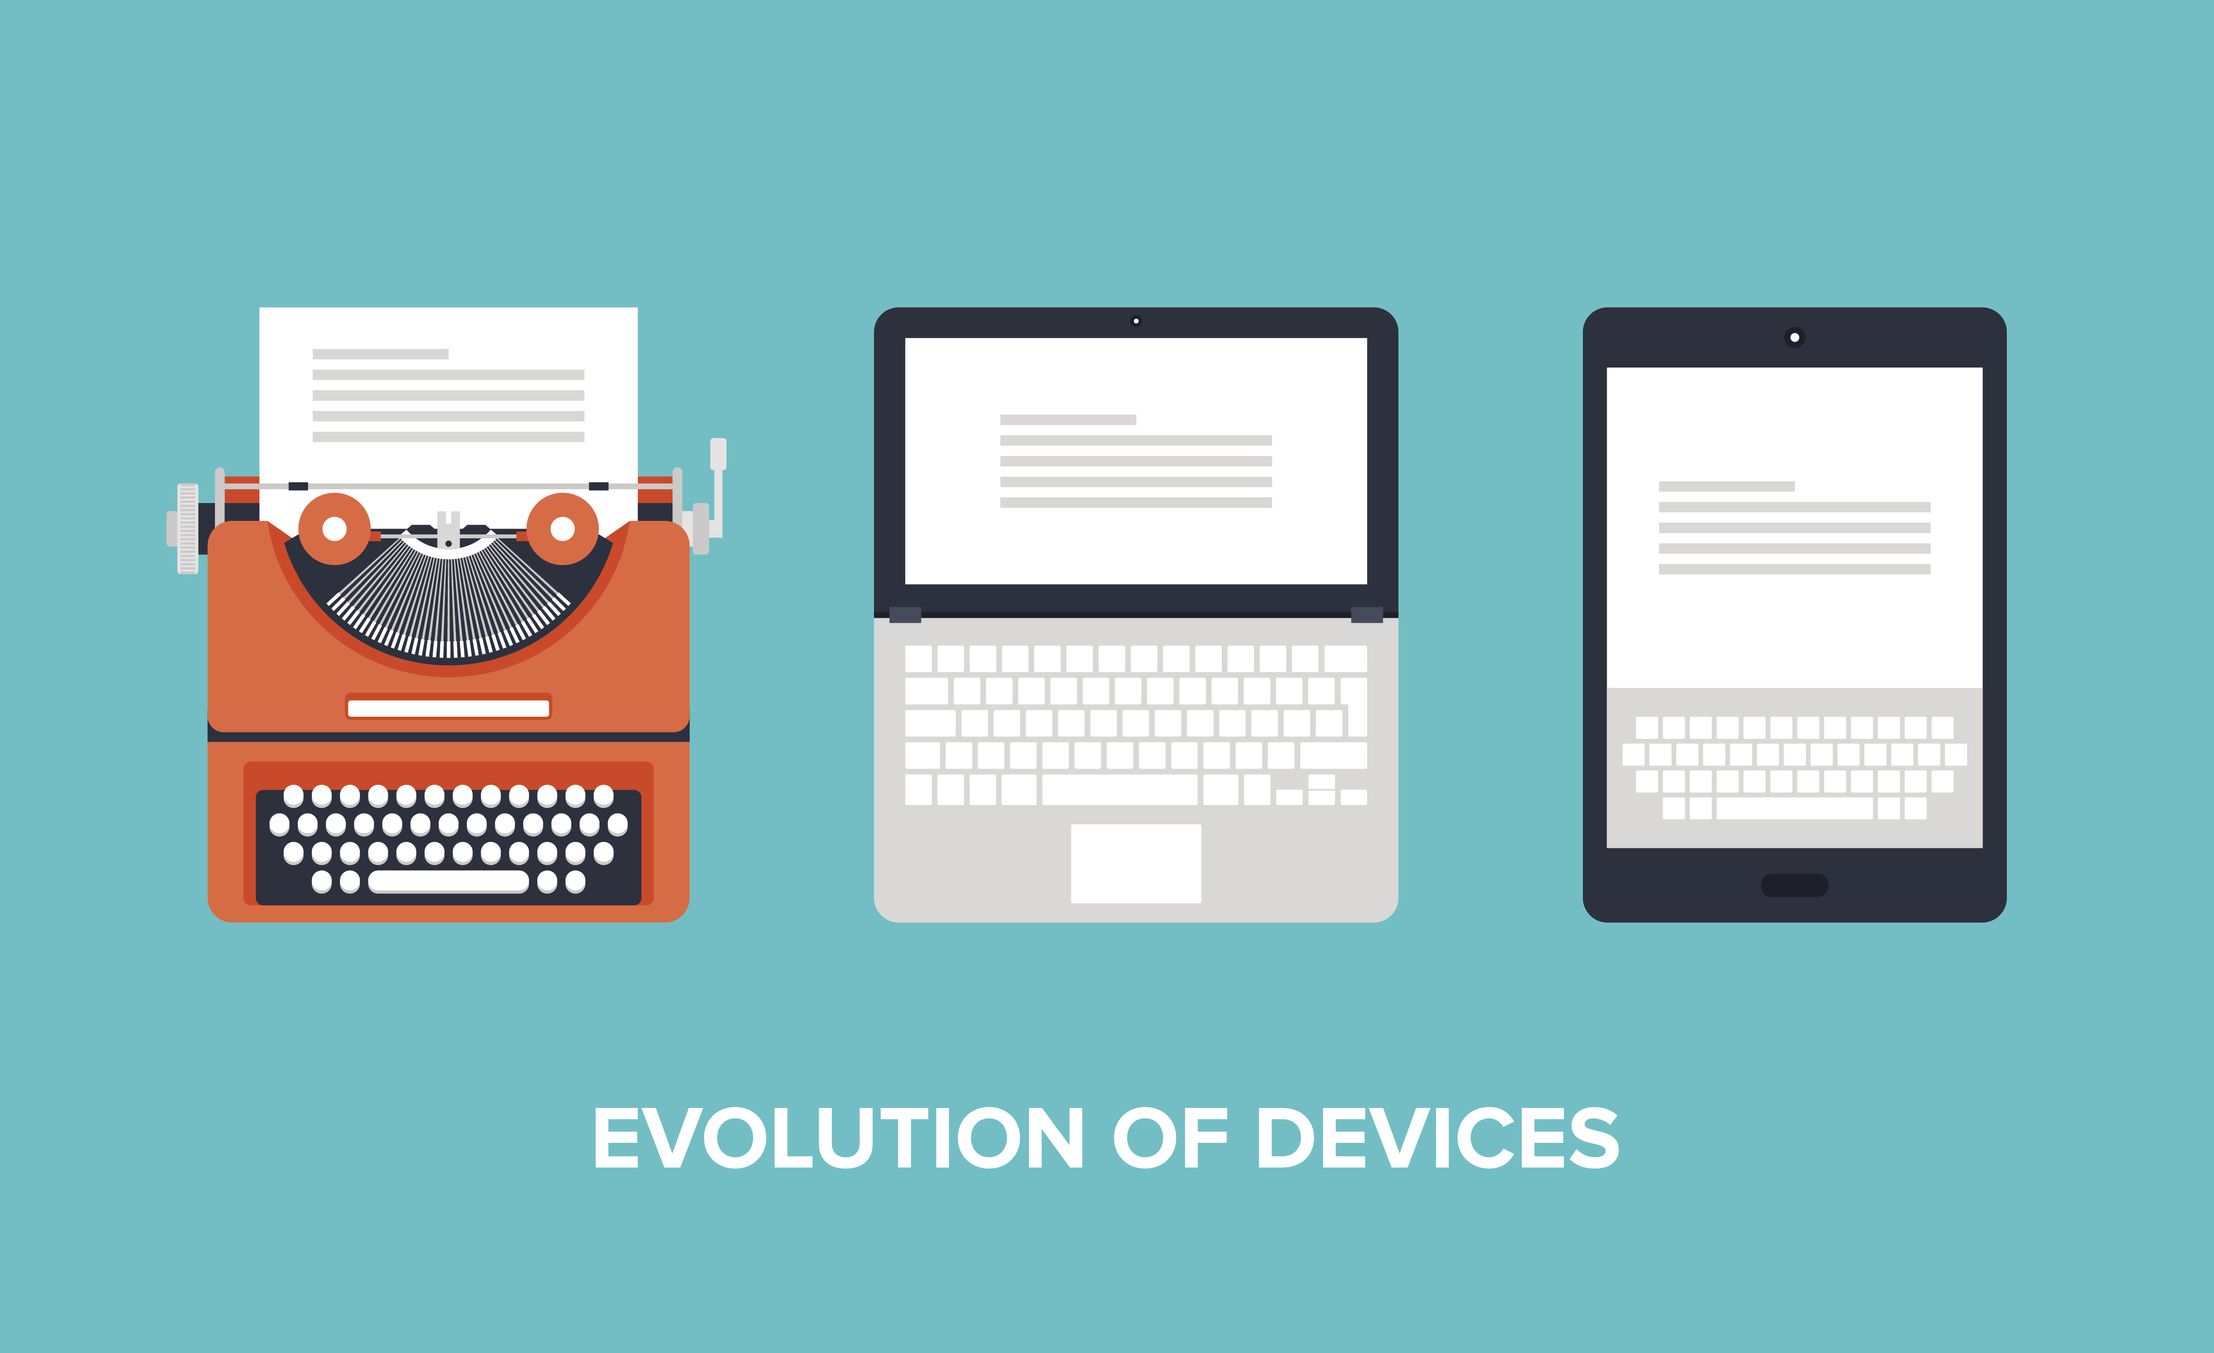 Evolution of devices from typewriter to laptop to a modern tablet